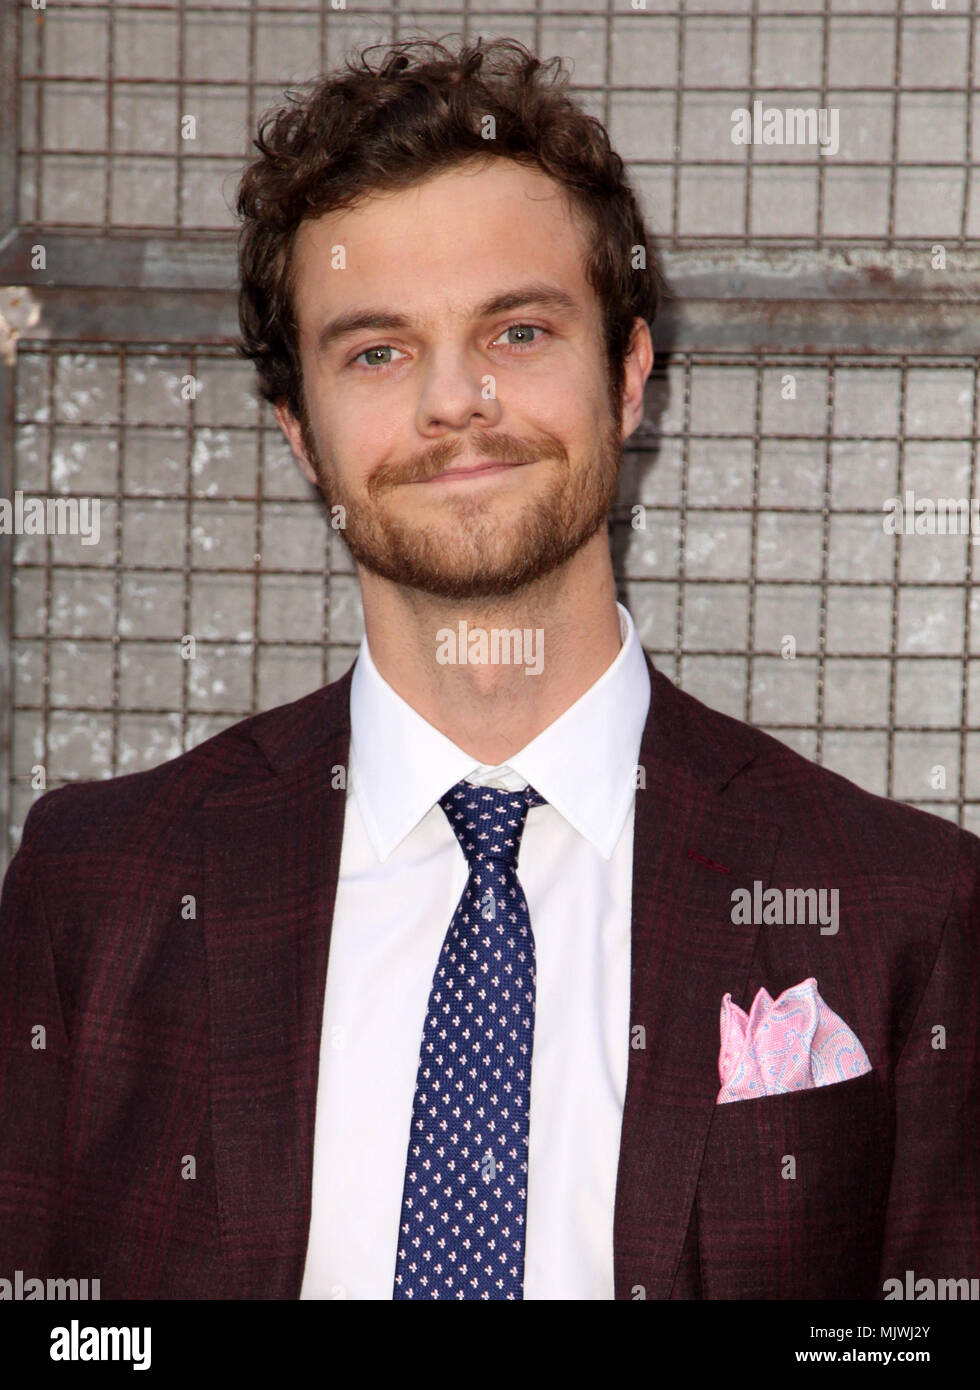 Celebrities attend 'Rampage' film premiere at the Microsoft Theater.  Featuring: Jack Quaid Where: Los Angeles, California, United States When: 05 Apr 2018 Credit: Brian To/WENN.com Stock Photo